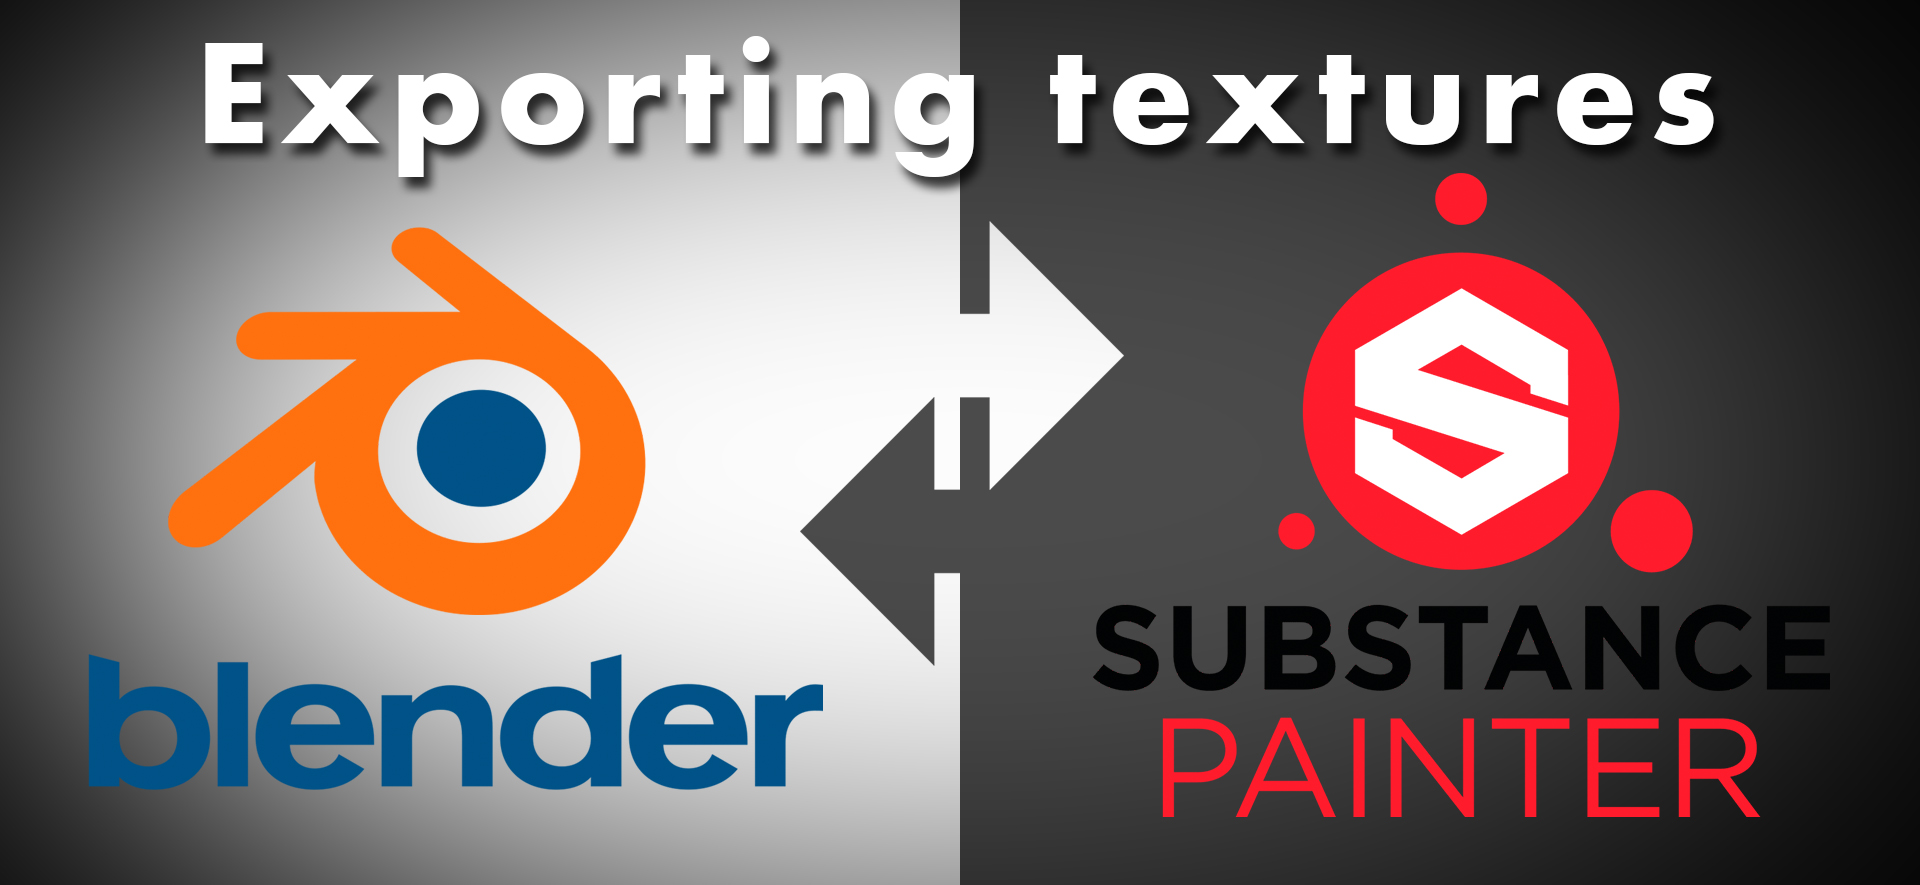 Exporting textures for Blender from Substance Painter -